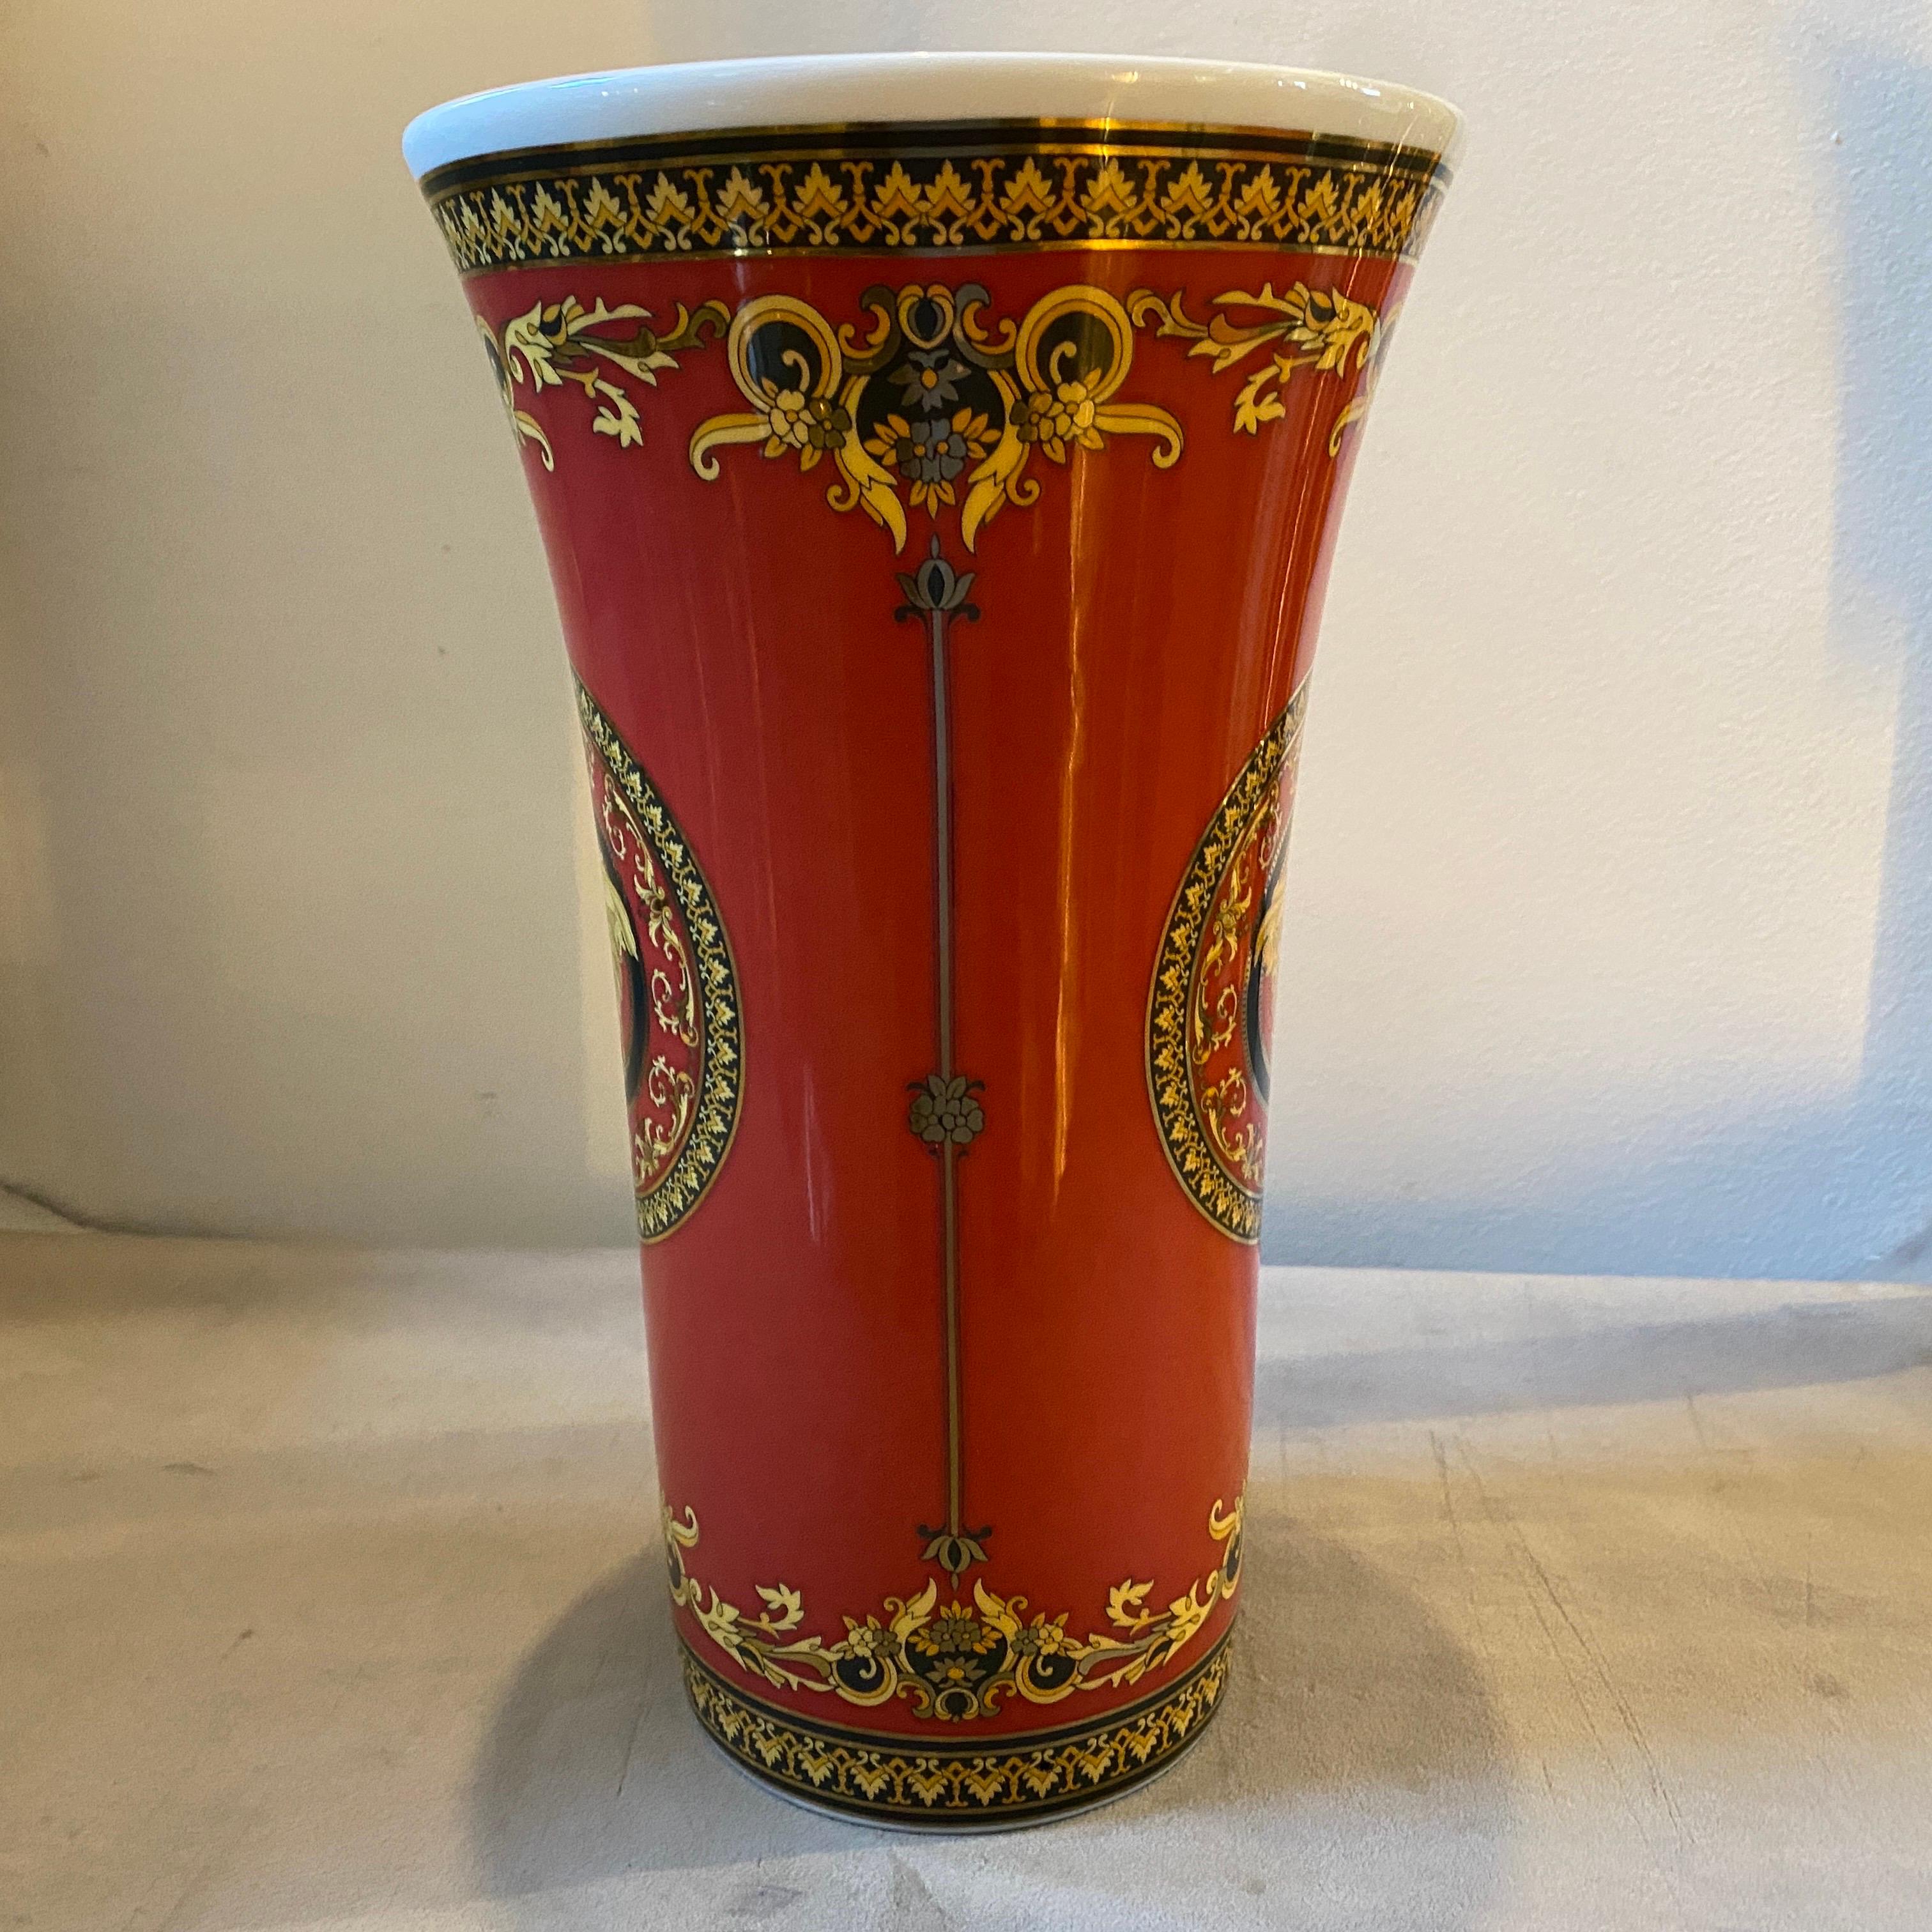 20th Century 1990s, Iconic Porcelain Medusa Vase Designed by Gianni Versace for Rosenthal For Sale